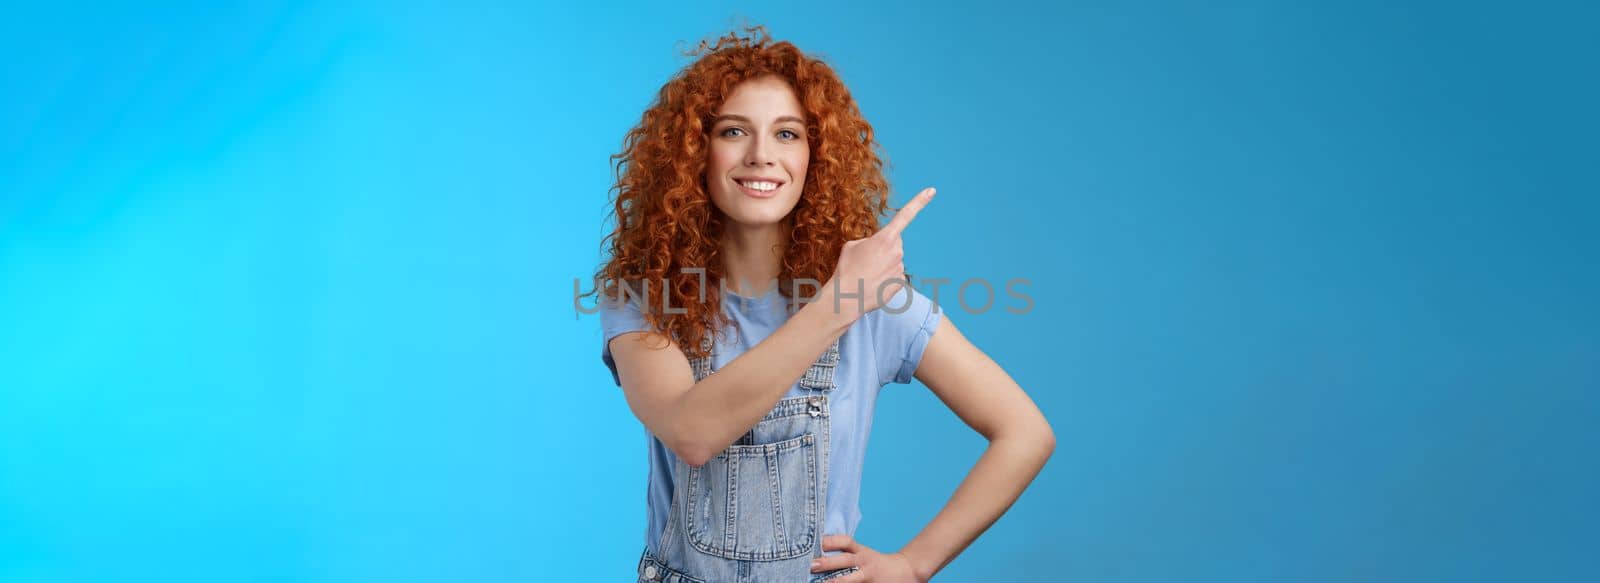 Motivated good-looking confident redhead curly girl dungarees feel empowered showing woman deal anything pointing upper left corner assertive assured you gonna like product, blue background.